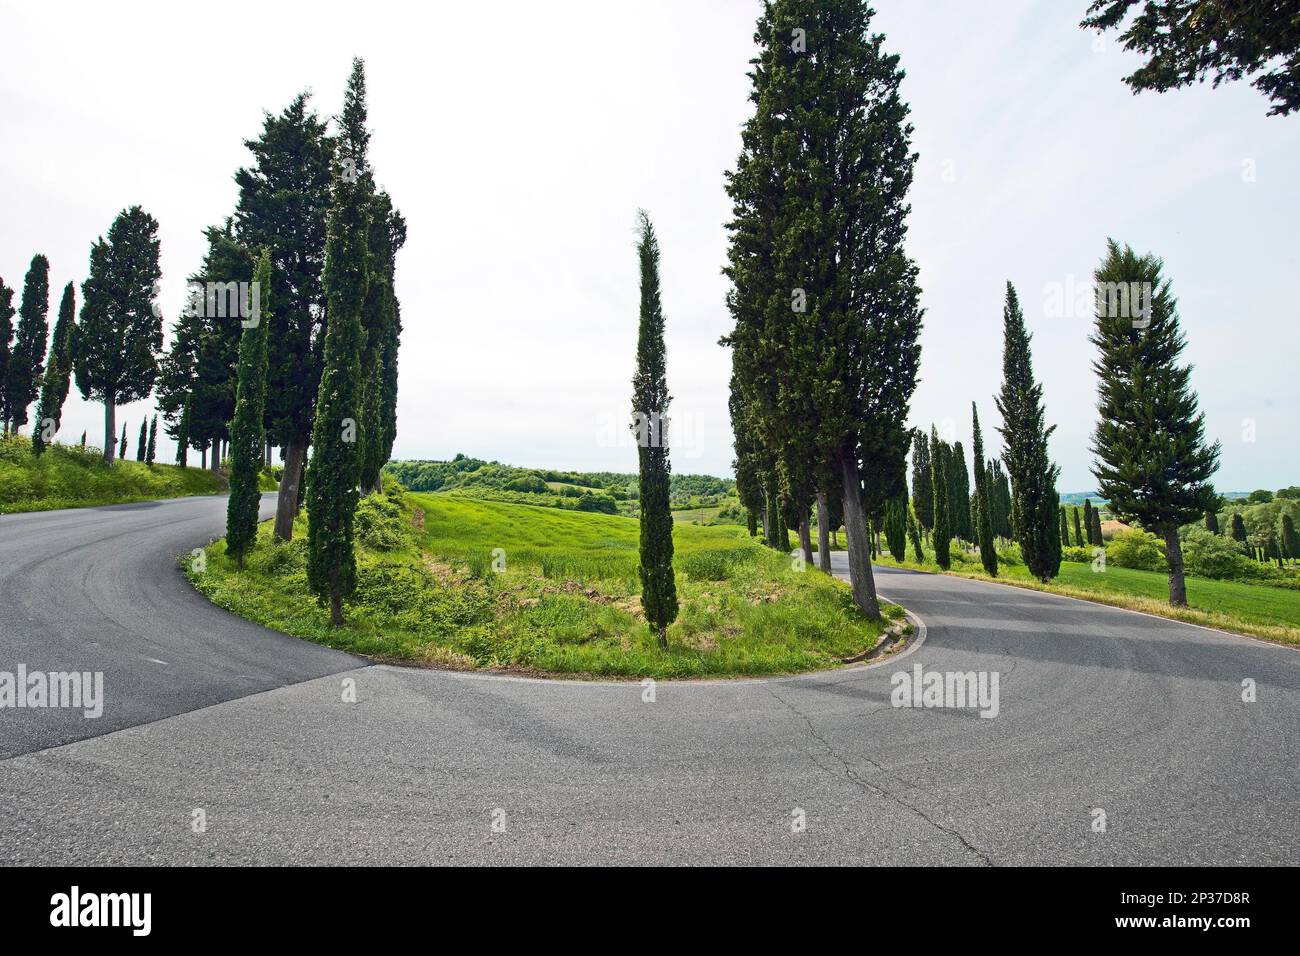 Cypresses (Cupressus sempervirens) along serpentine road, Tuscany, Italy, Europe Stock Photo